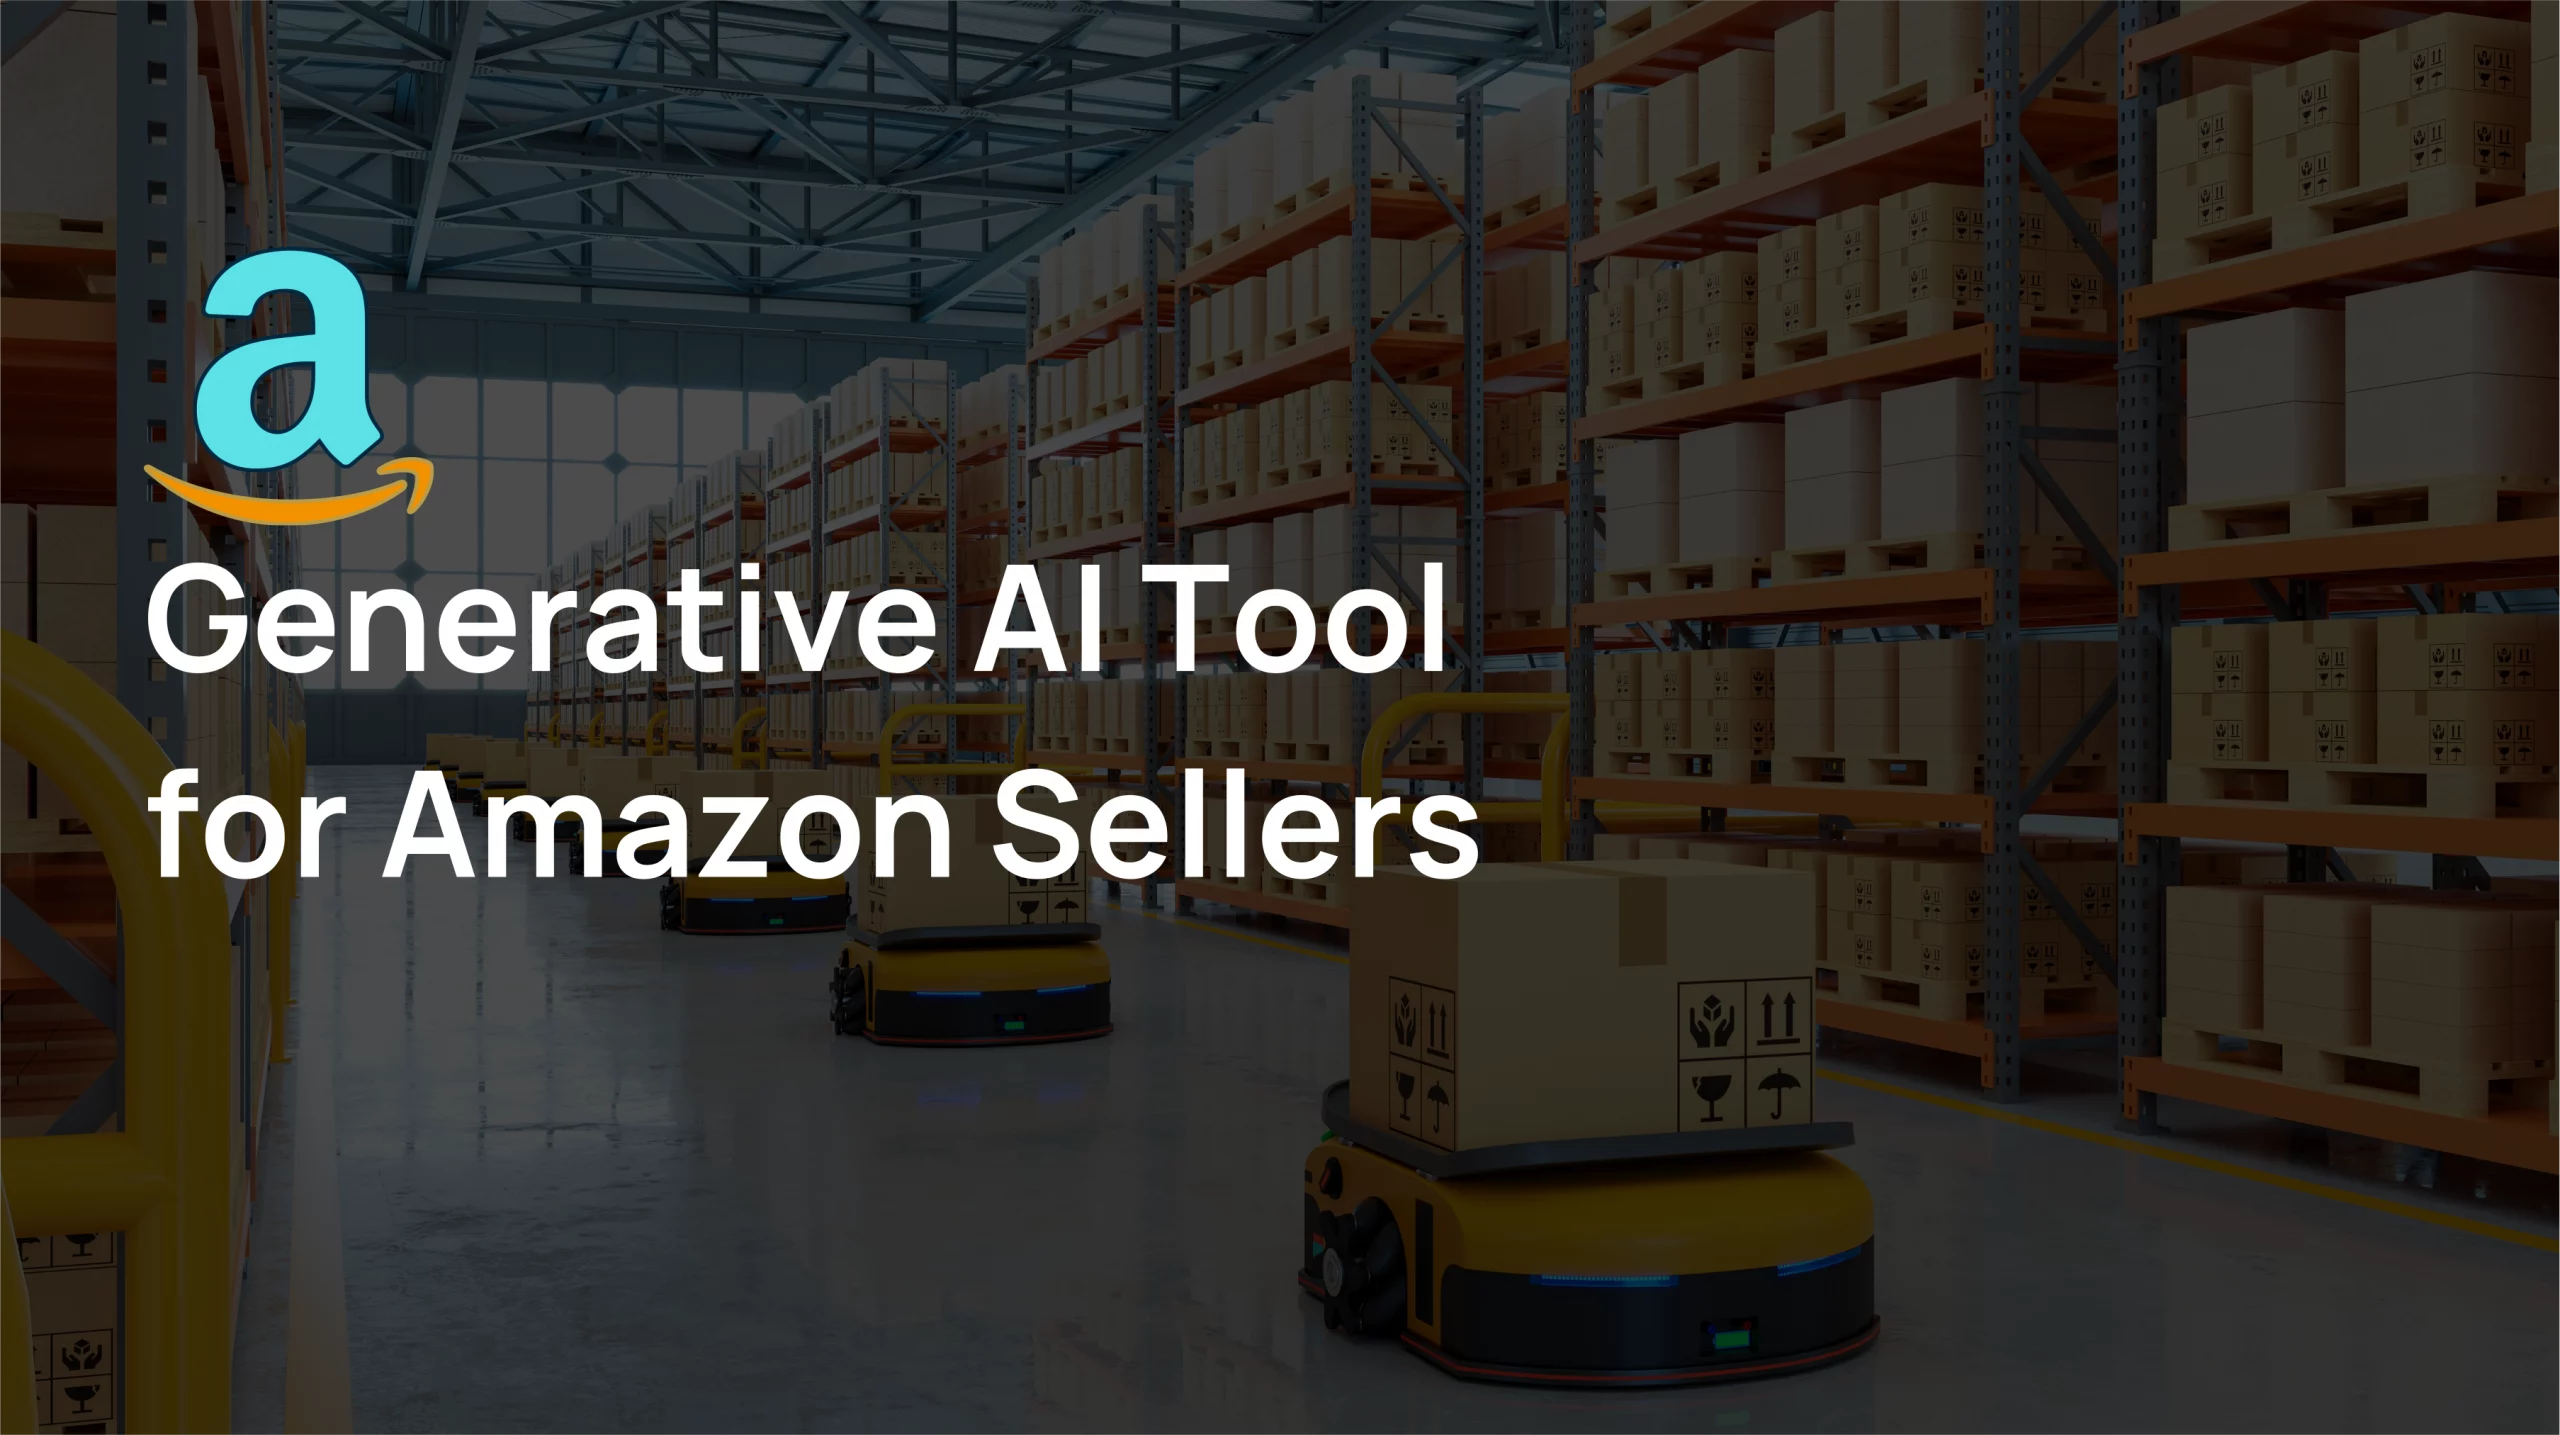 How Does Amazon AI for Sellers Work? What Exactly Does Amazon's Generative AI for Sellers Do?